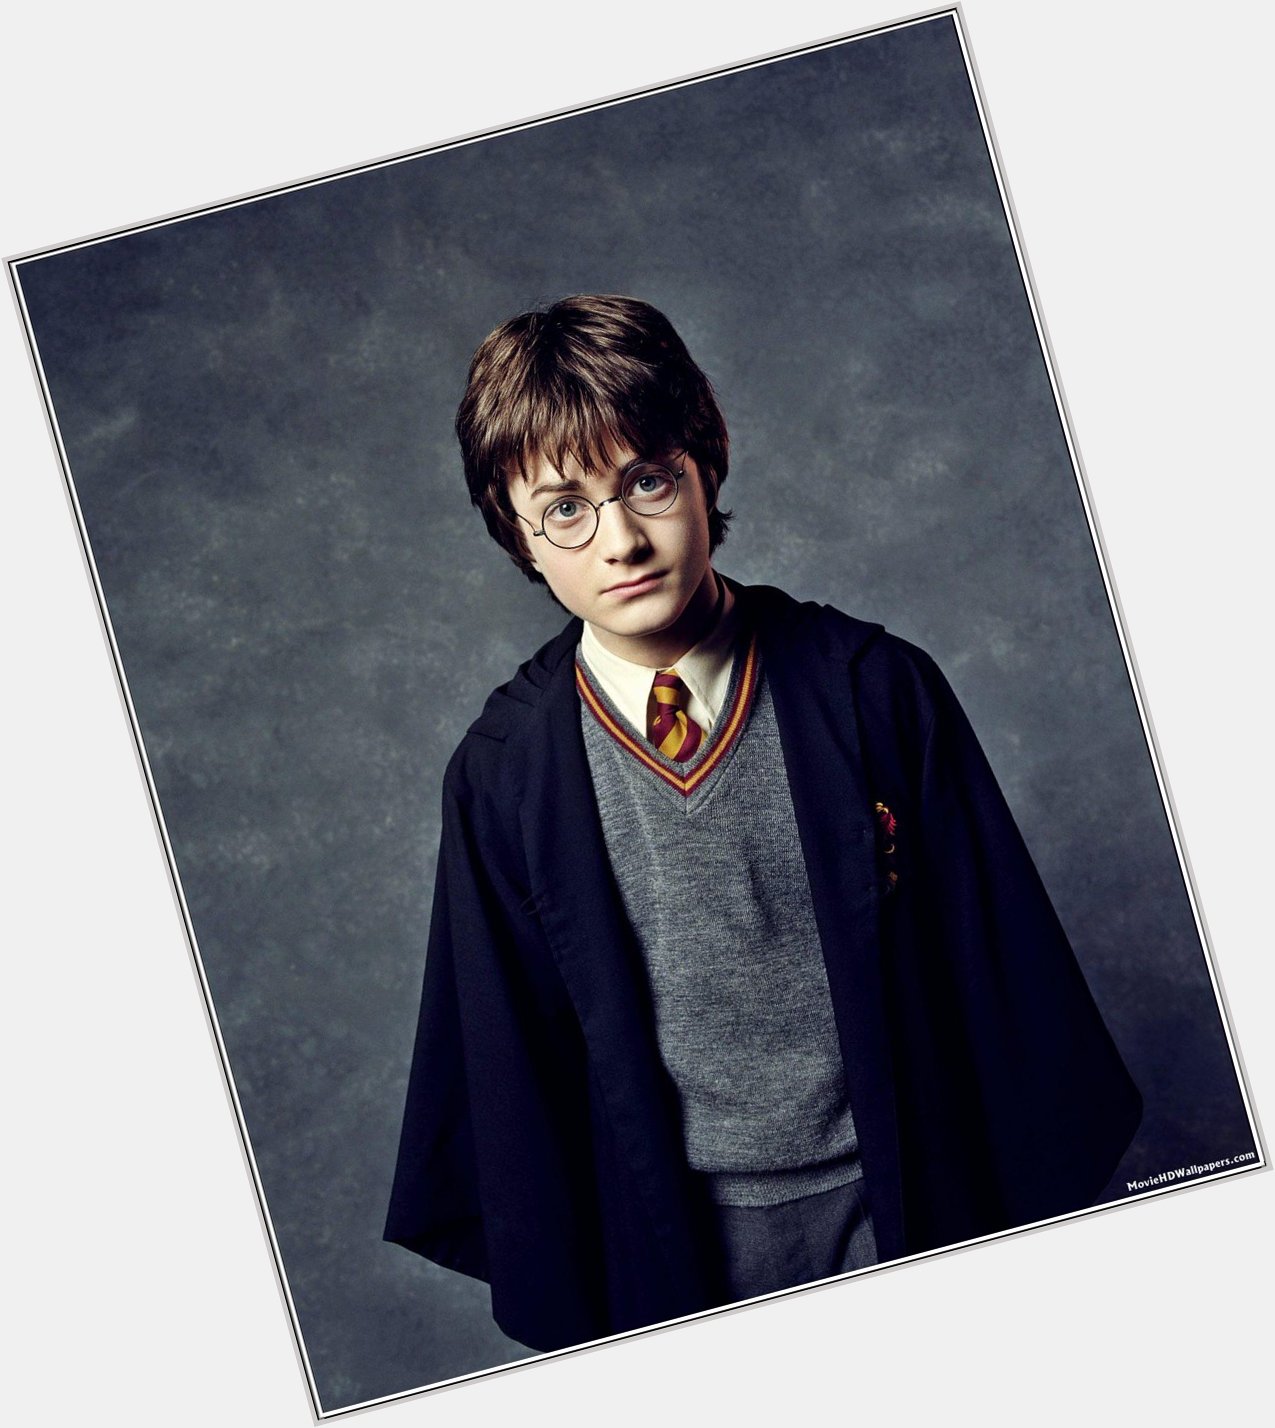 Happy birthday to Daniel Radcliffe, he has come a long way from his harry potter days! 